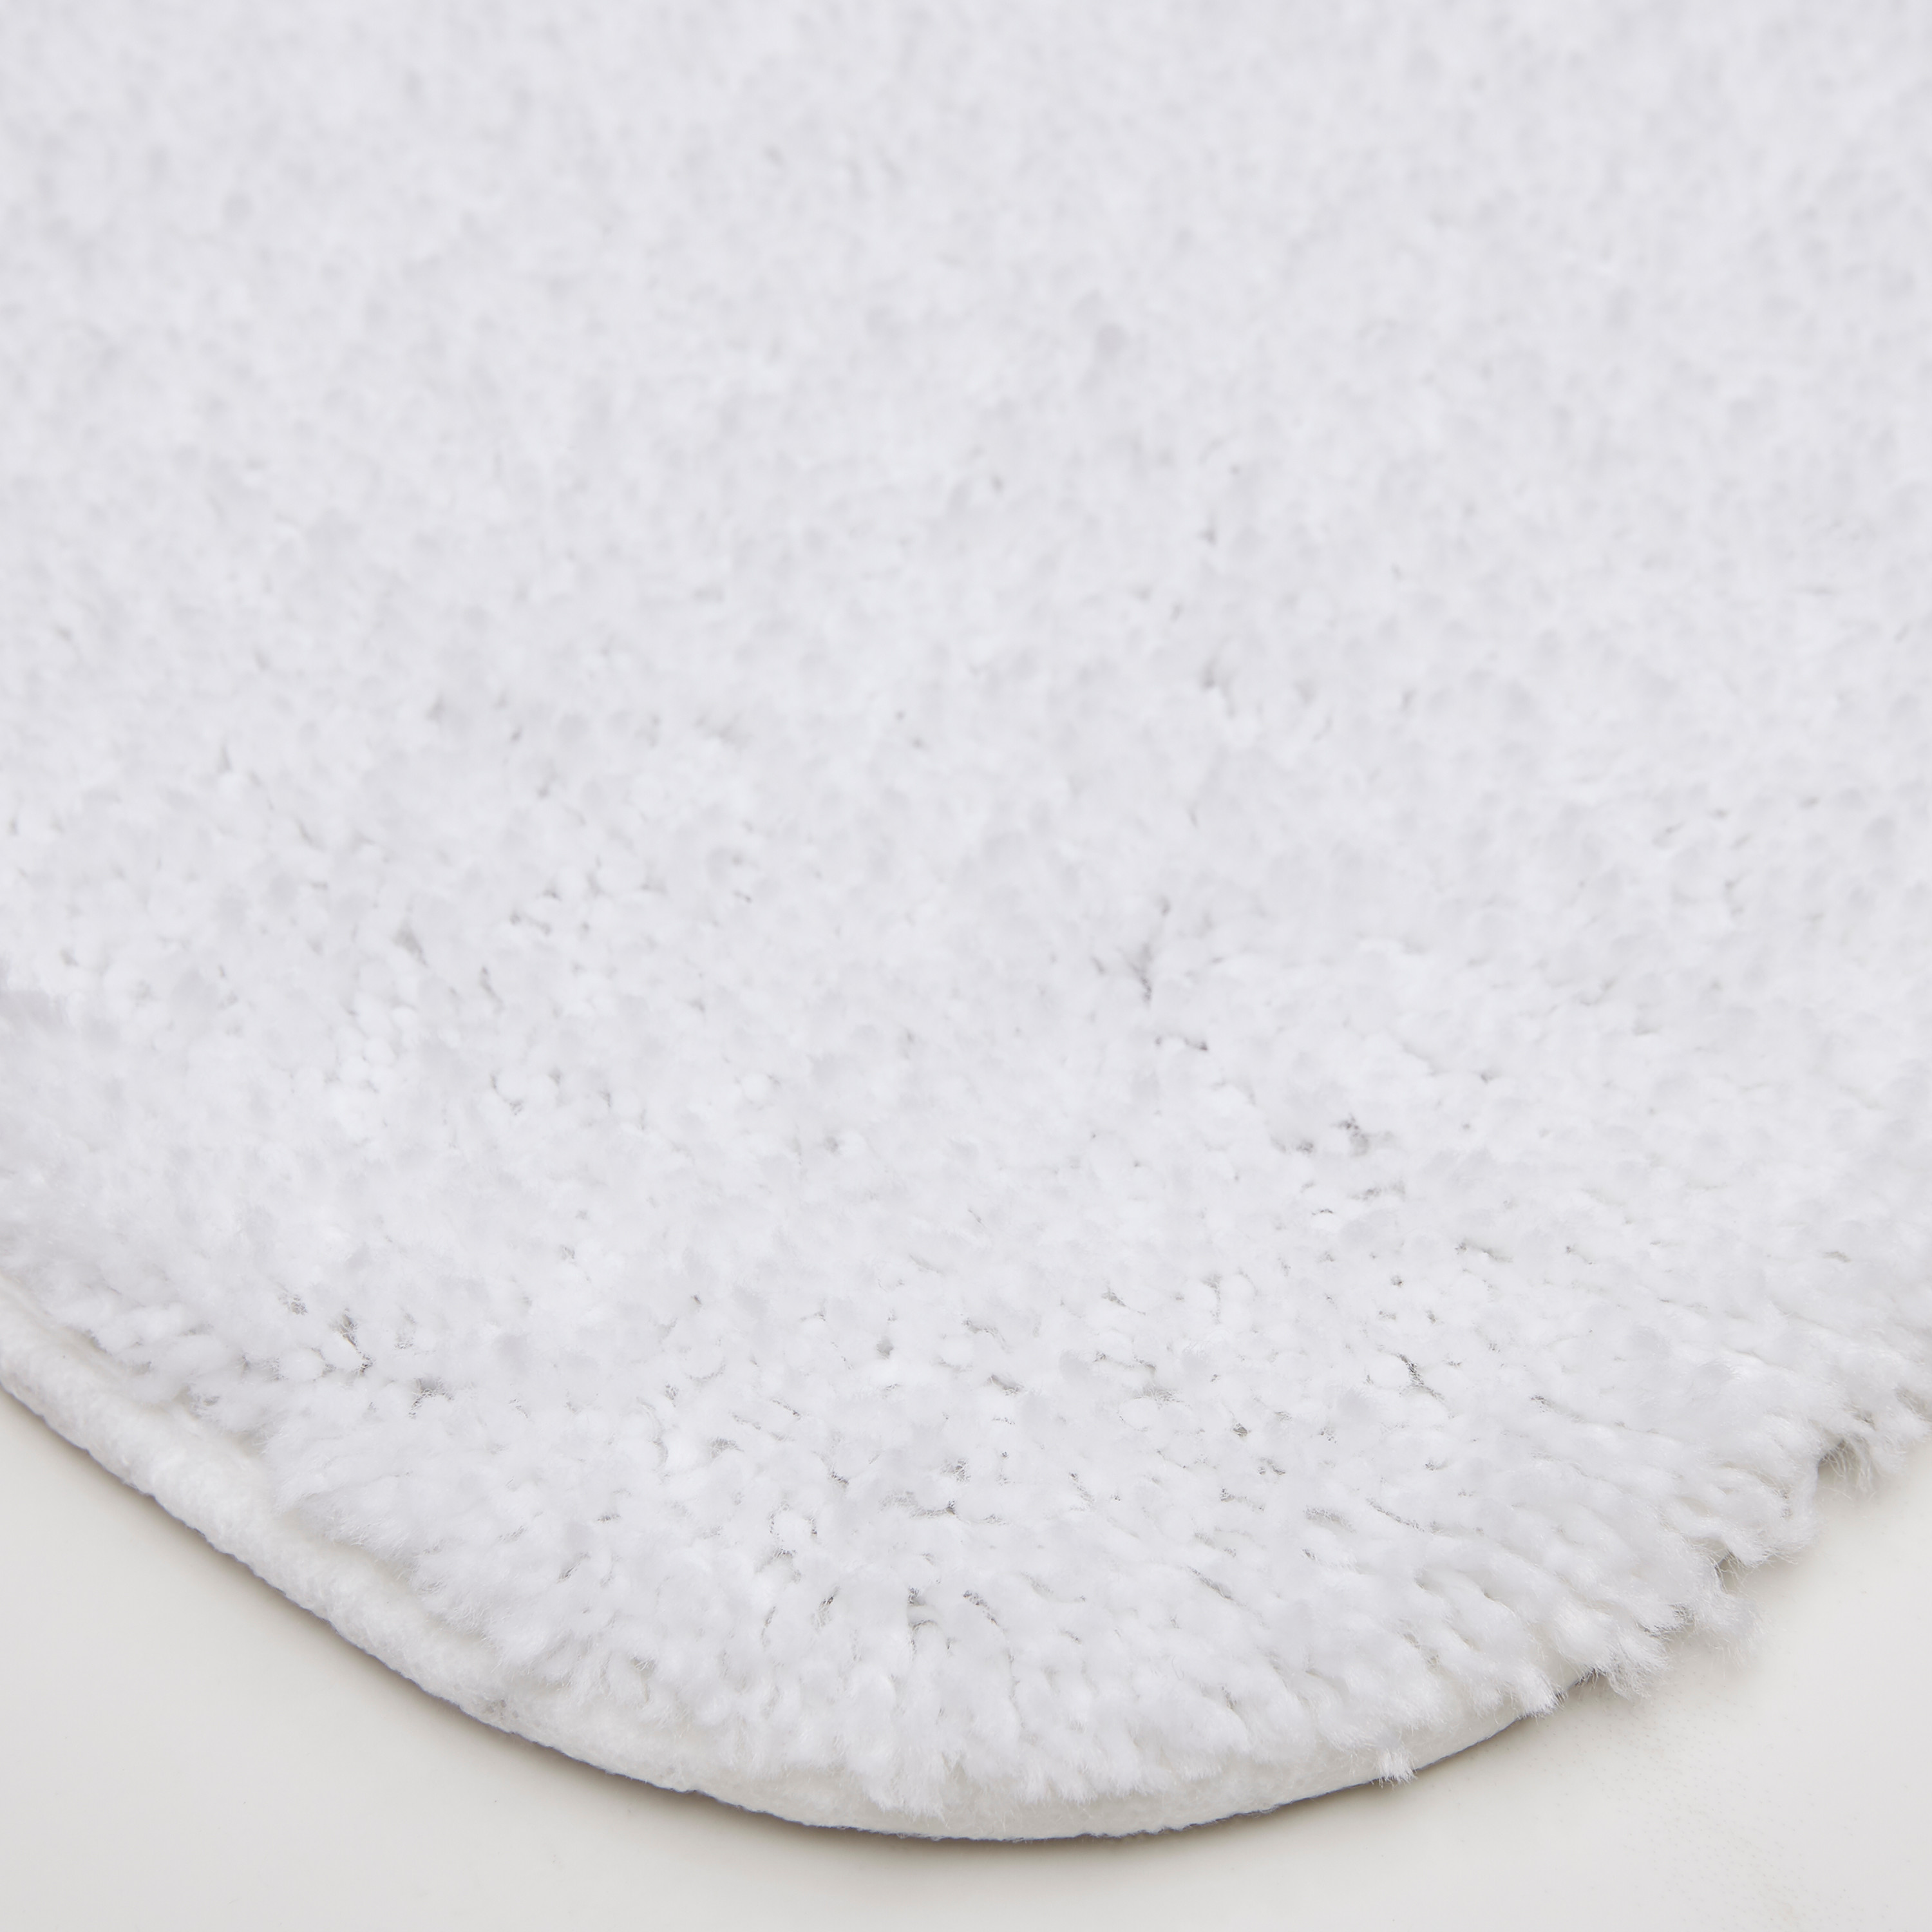 Mohawk Home Pure Perfection Nylon Bath Rug Scatter, White 1'8" x 5' - image 4 of 4